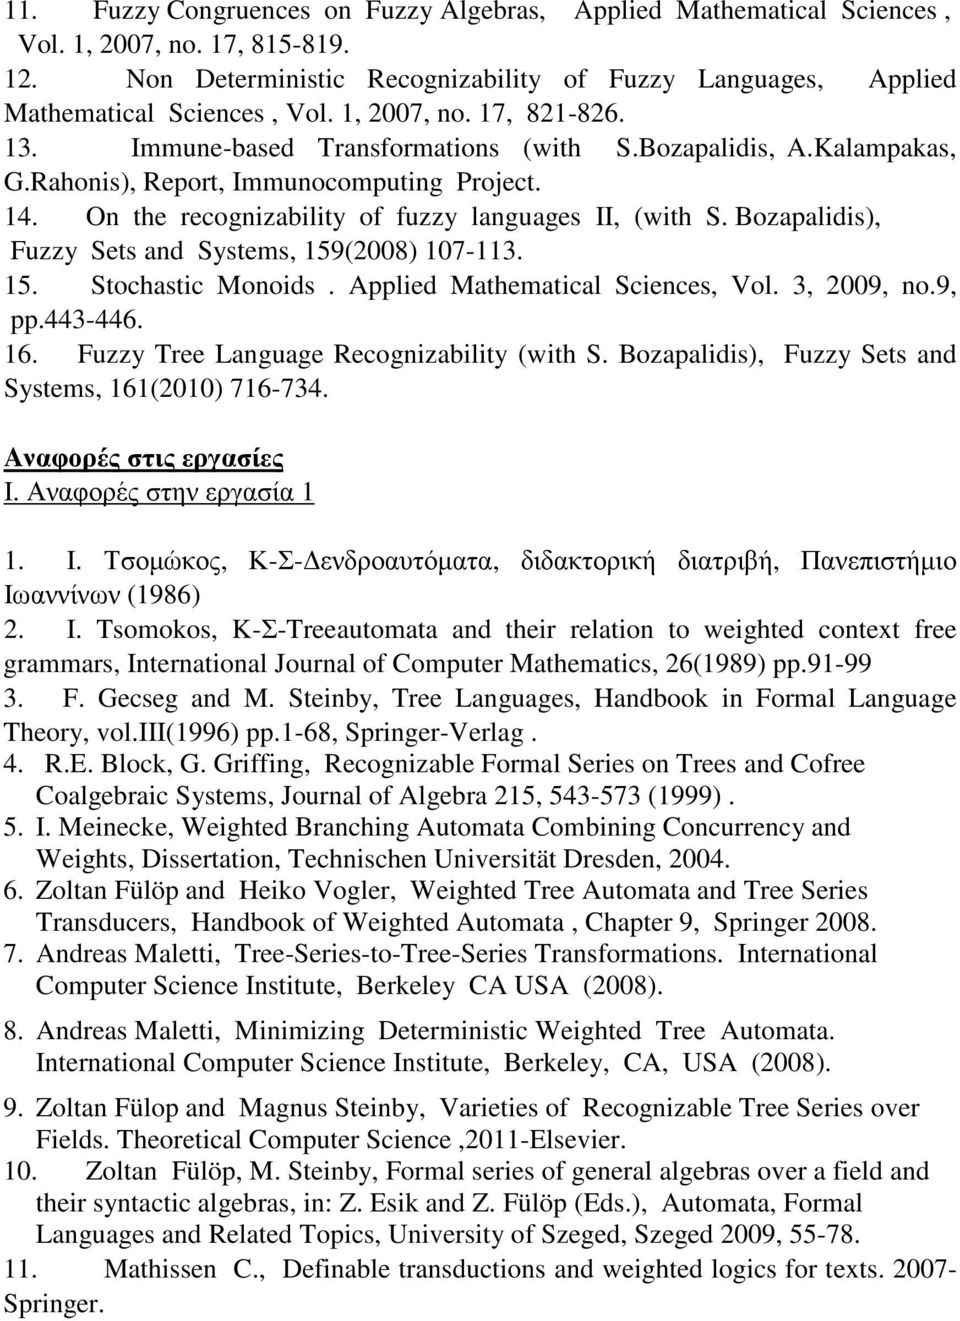 Bozapalidis), Fuzzy Sets and Systems, 159(2008) 107-113. 15. Stochastic Monoids. Applied Mathematical Sciences, Vol. 3, 2009, no.9, pp.443-446. 16. Fuzzy Tree Language Recognizability (with S.